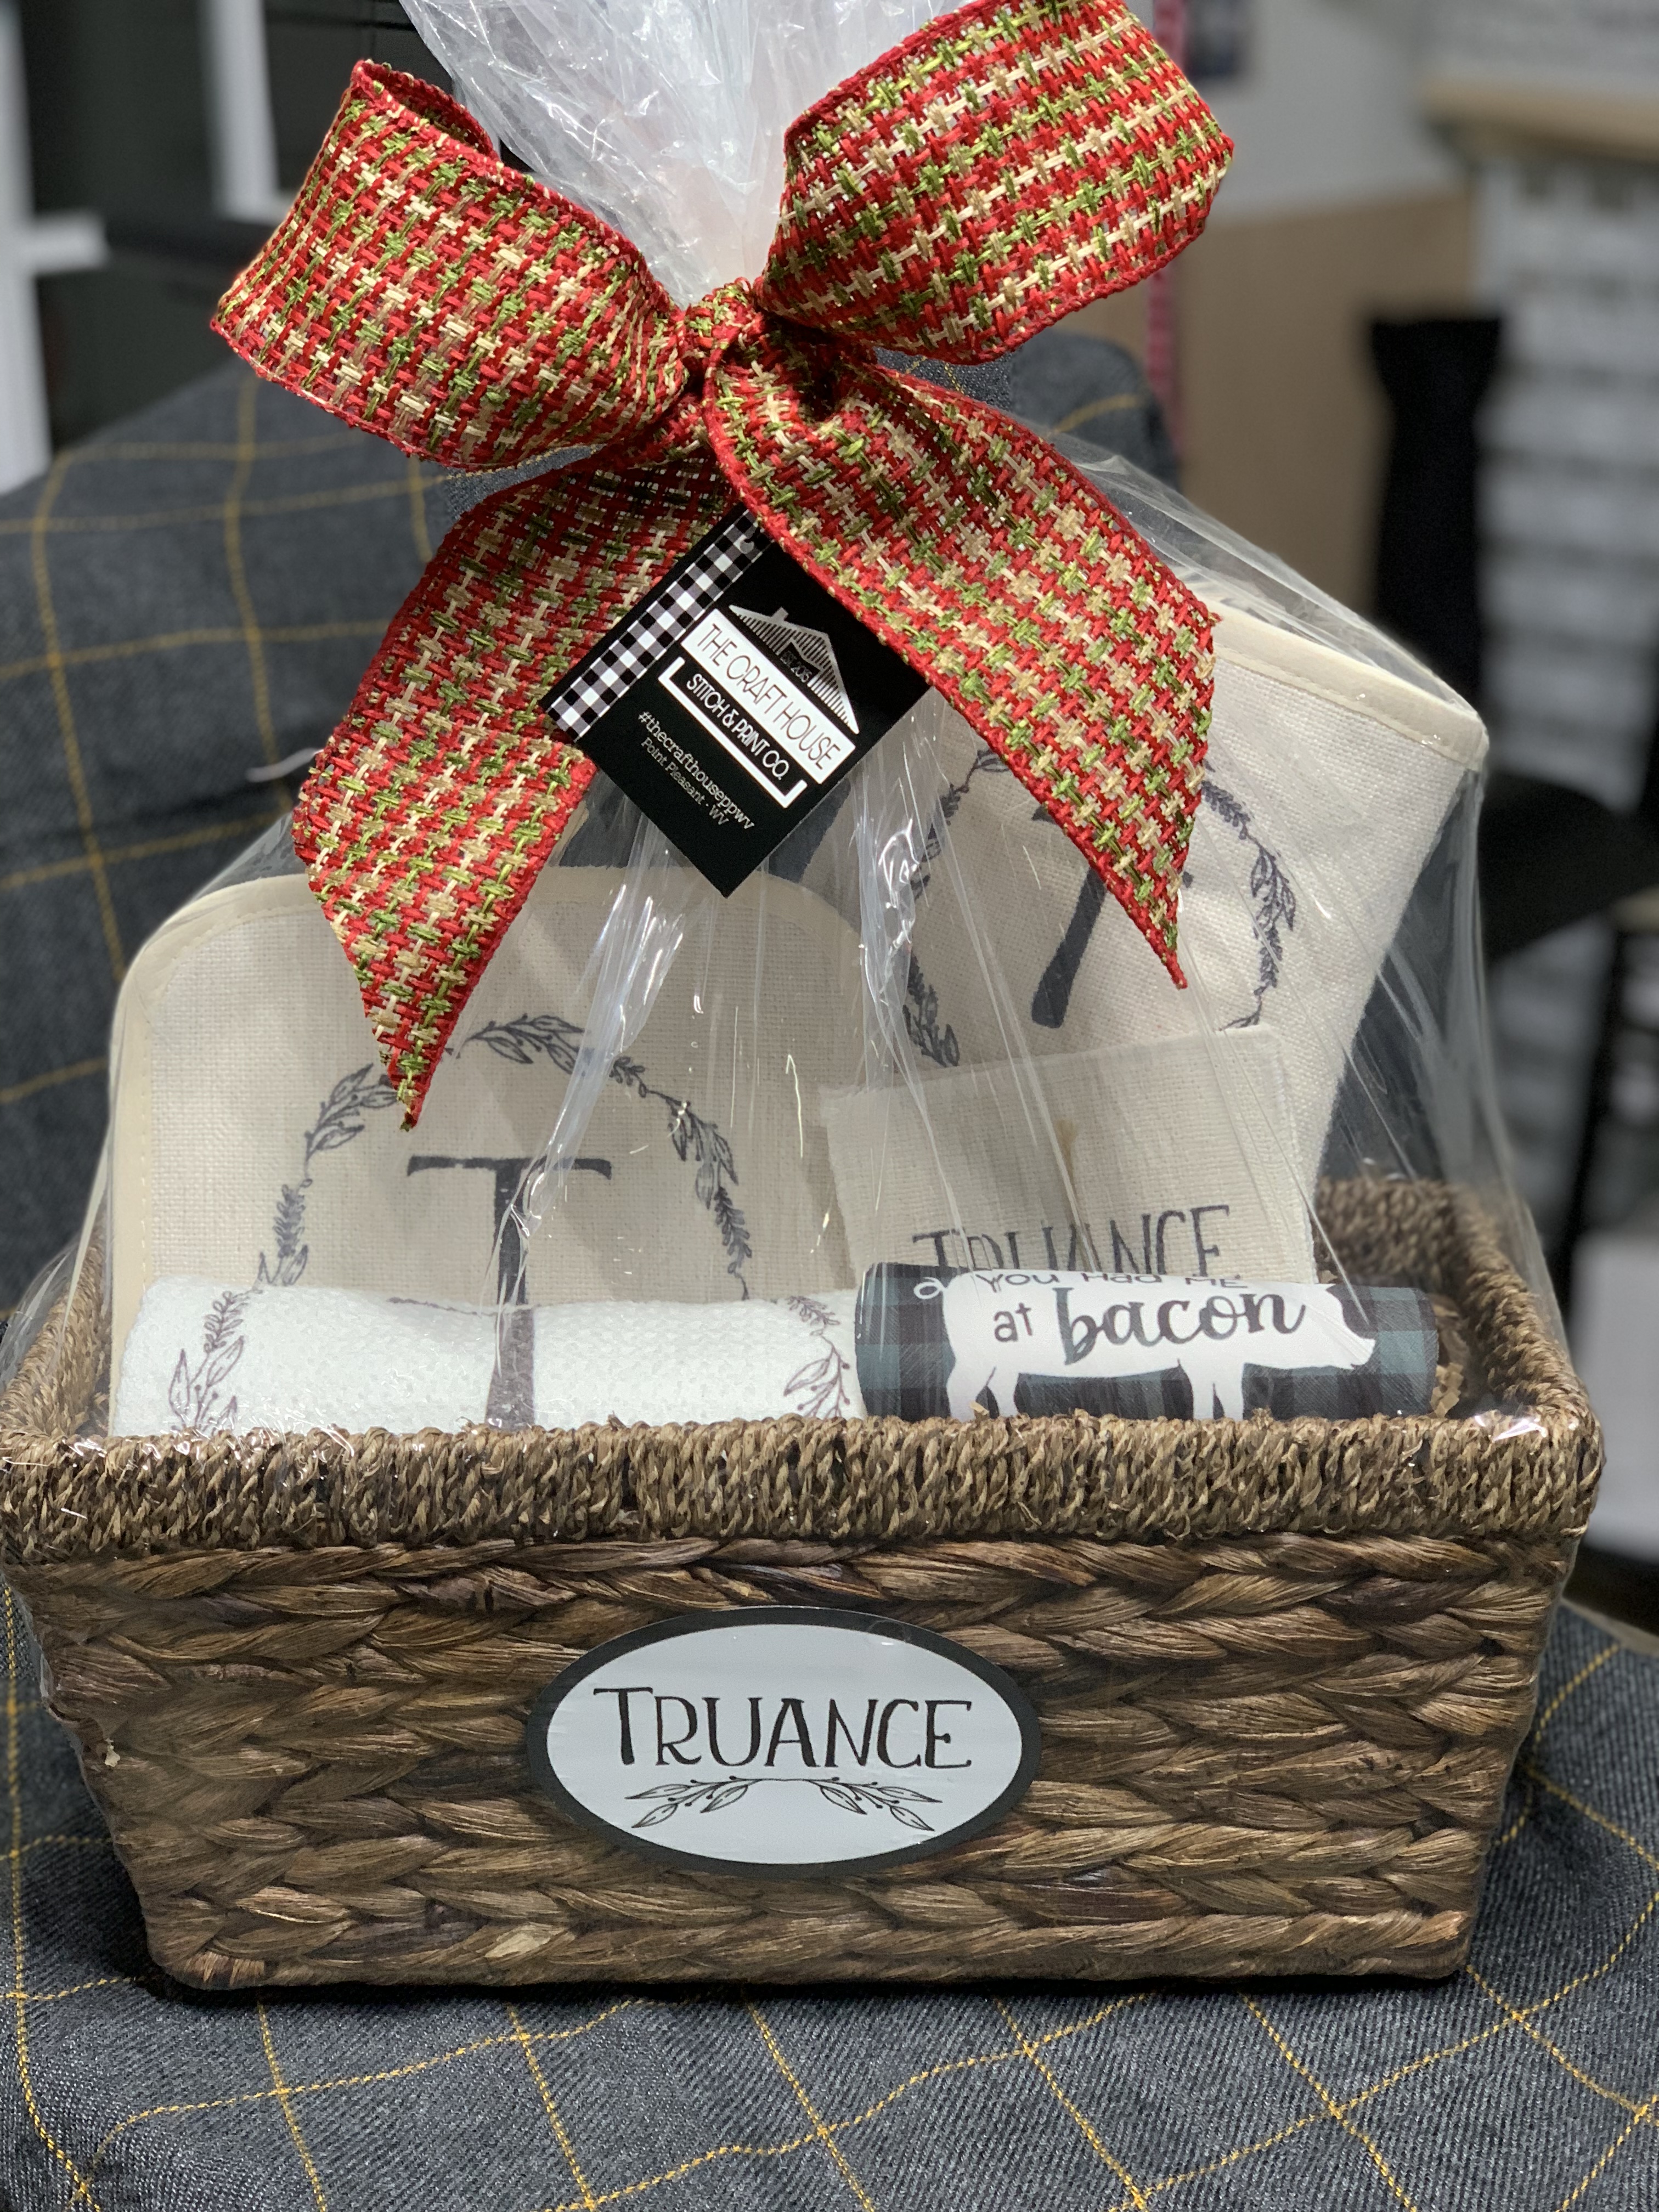 Personalized Gift Baskets made with sublimation printing